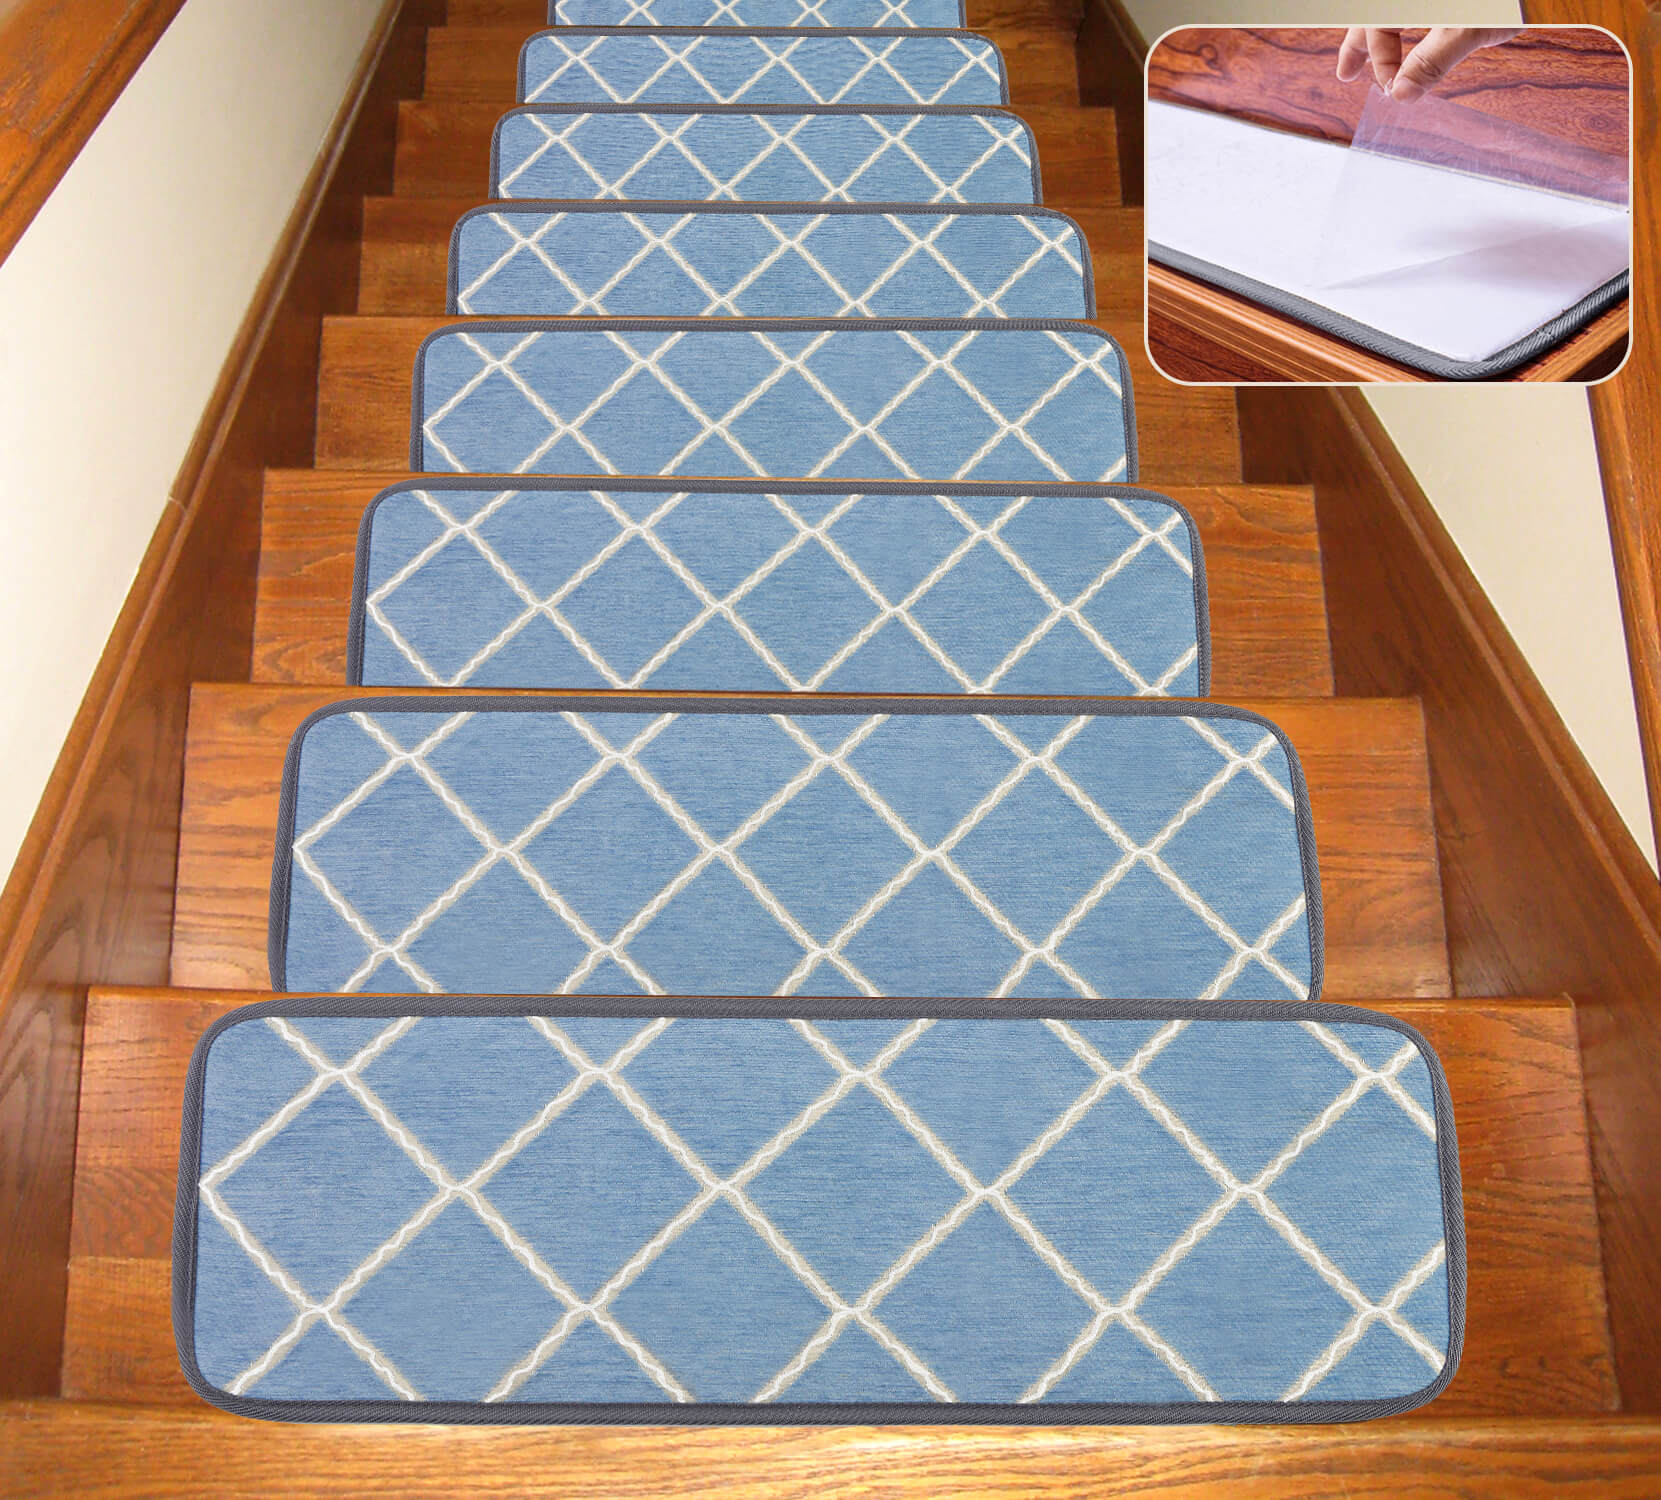 Seloom Blue Non-Slip Stair Treads Carpet with Skid Resistant Rubber Backing and Modern Moroccan Diamond Trellis Design for Indoor Wooden Steps (25.5x9.5 Inch, 13Piece, Dusk Blue)